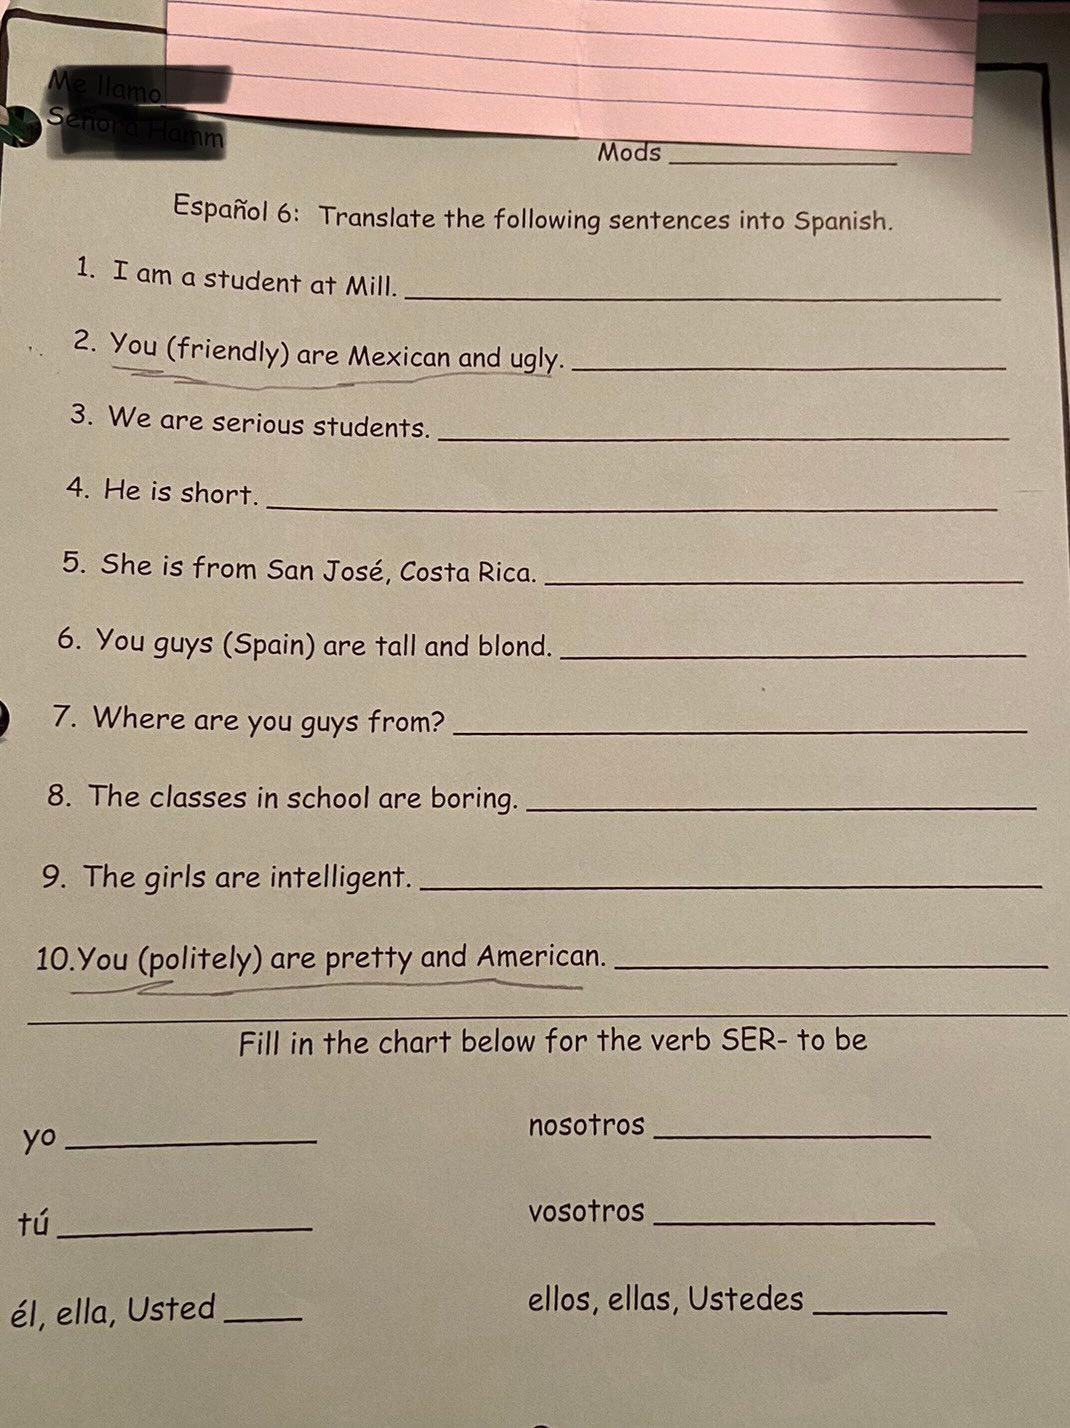 Racist homework assignment in upstate NY